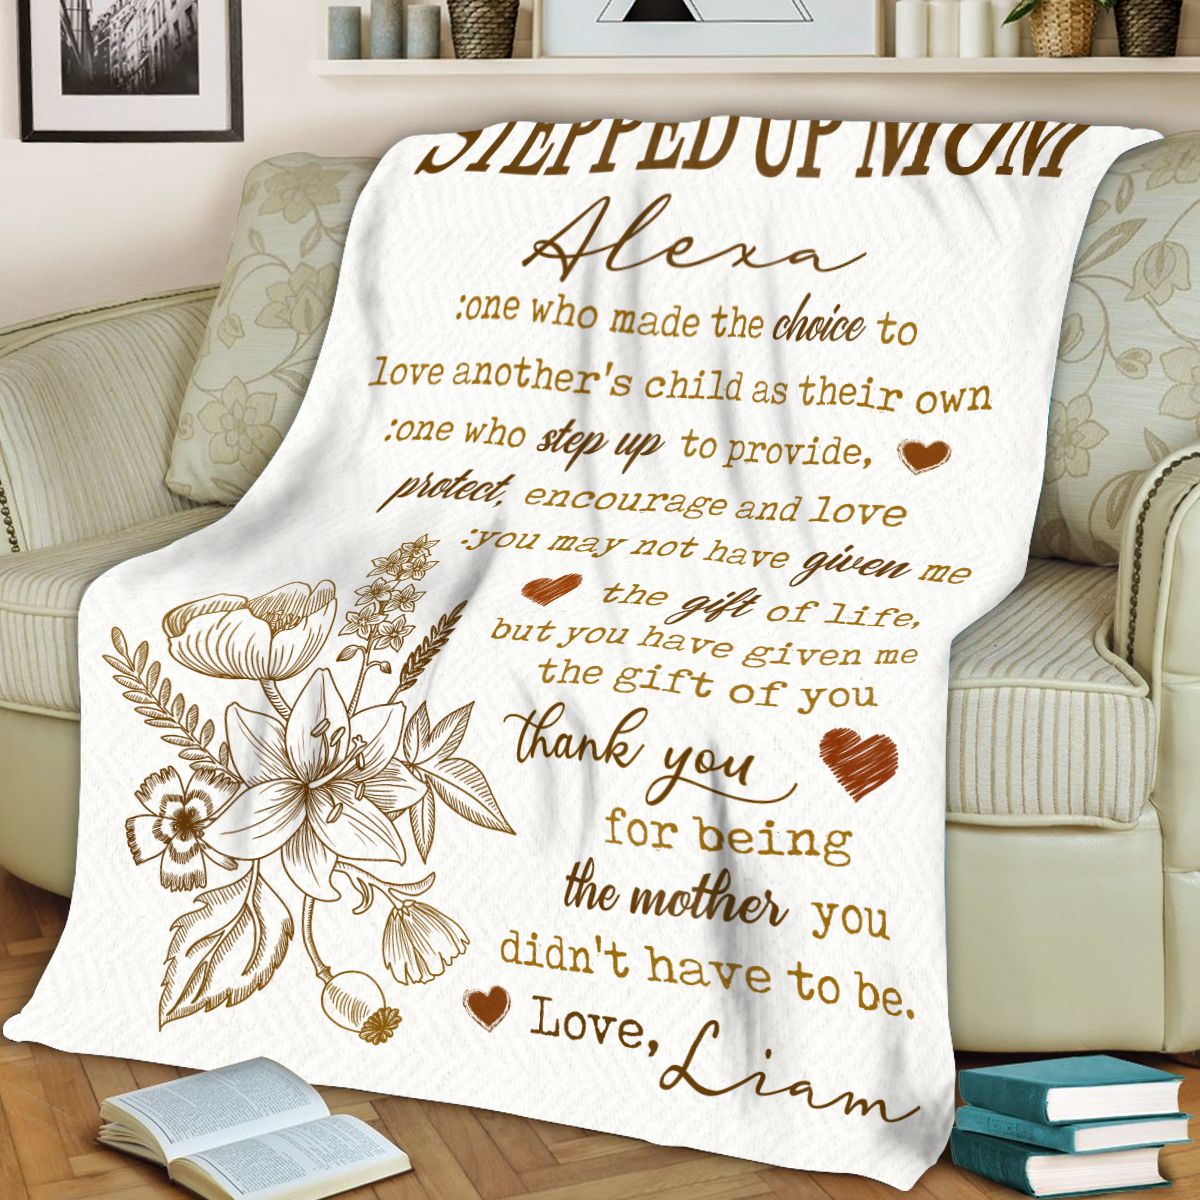 Personalized Throw Blanket for Me and Mom, or Me and Dad. A